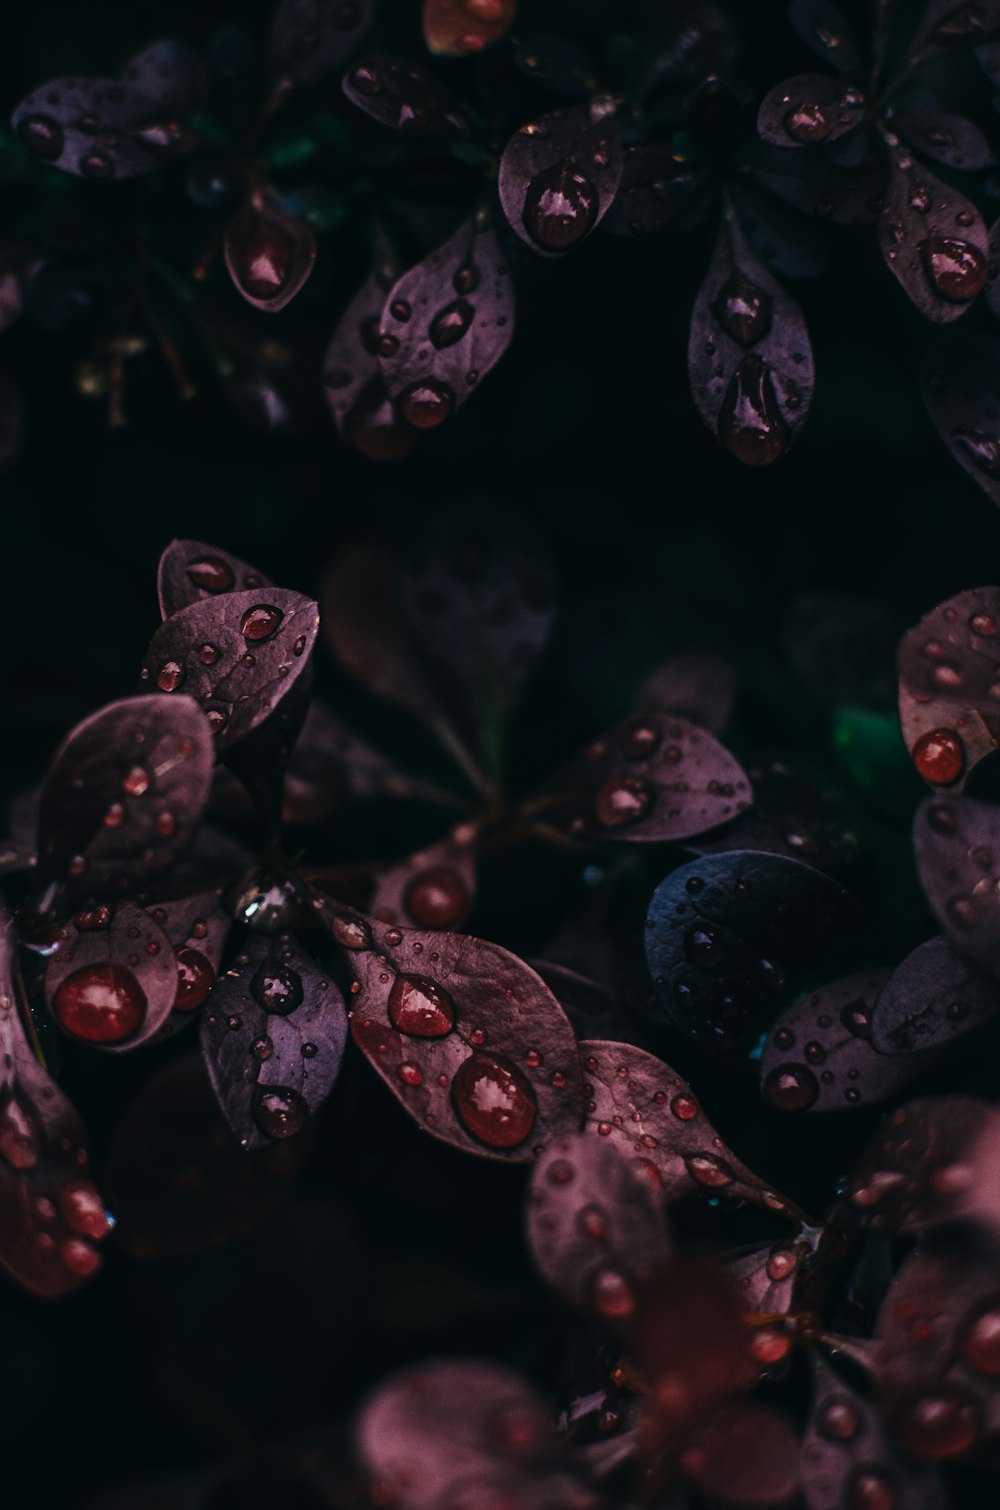 water droplets on leaves